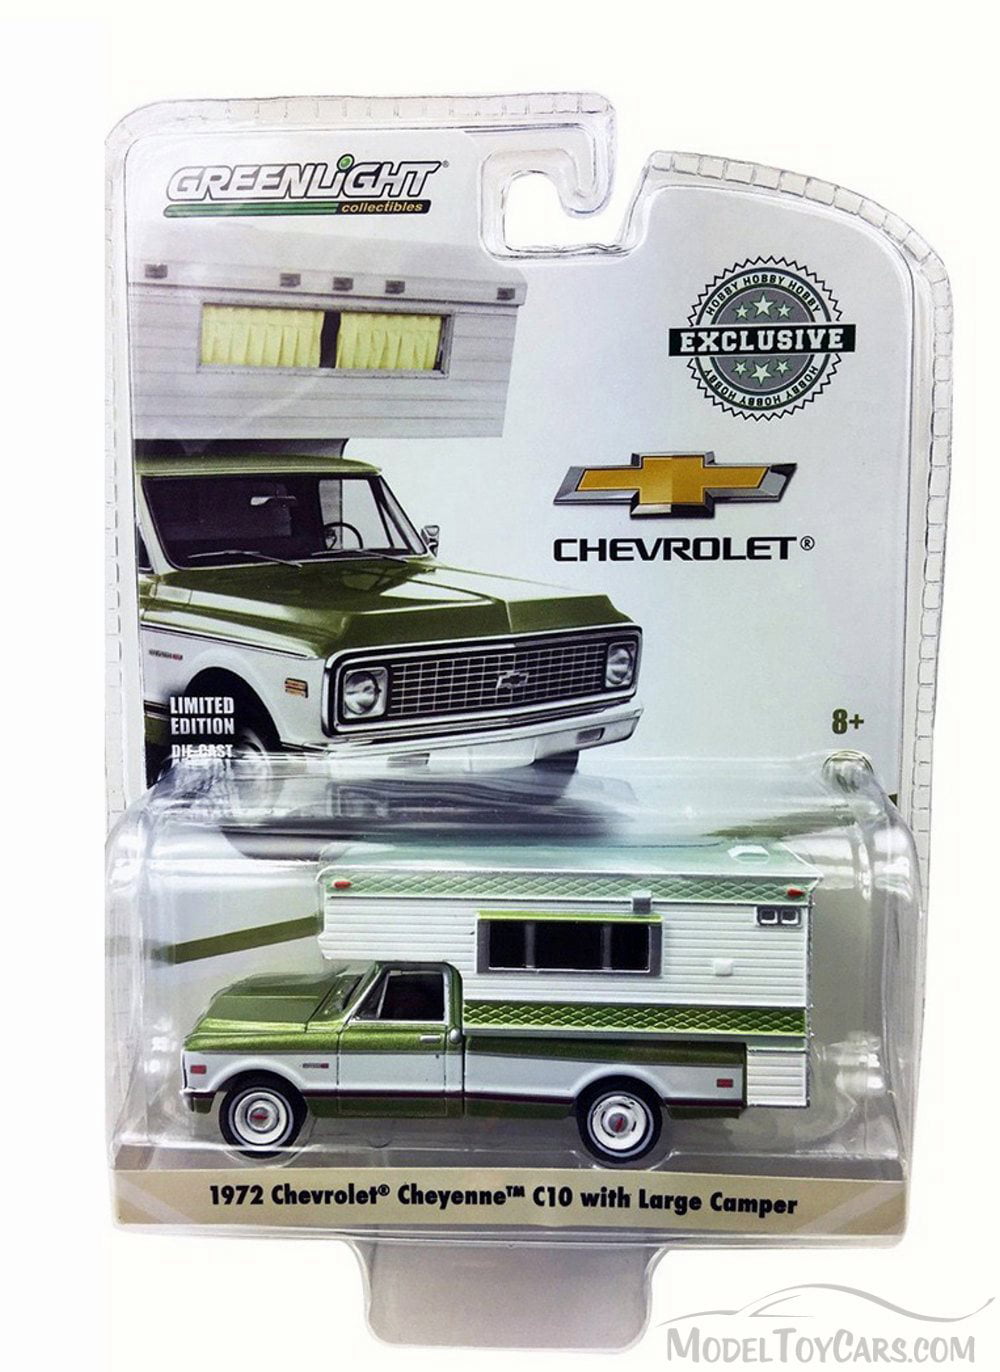 Details about   1972 72 Chevrolet C10 Cheyenne Truck & Camper collectible 1:64 scale diecast 